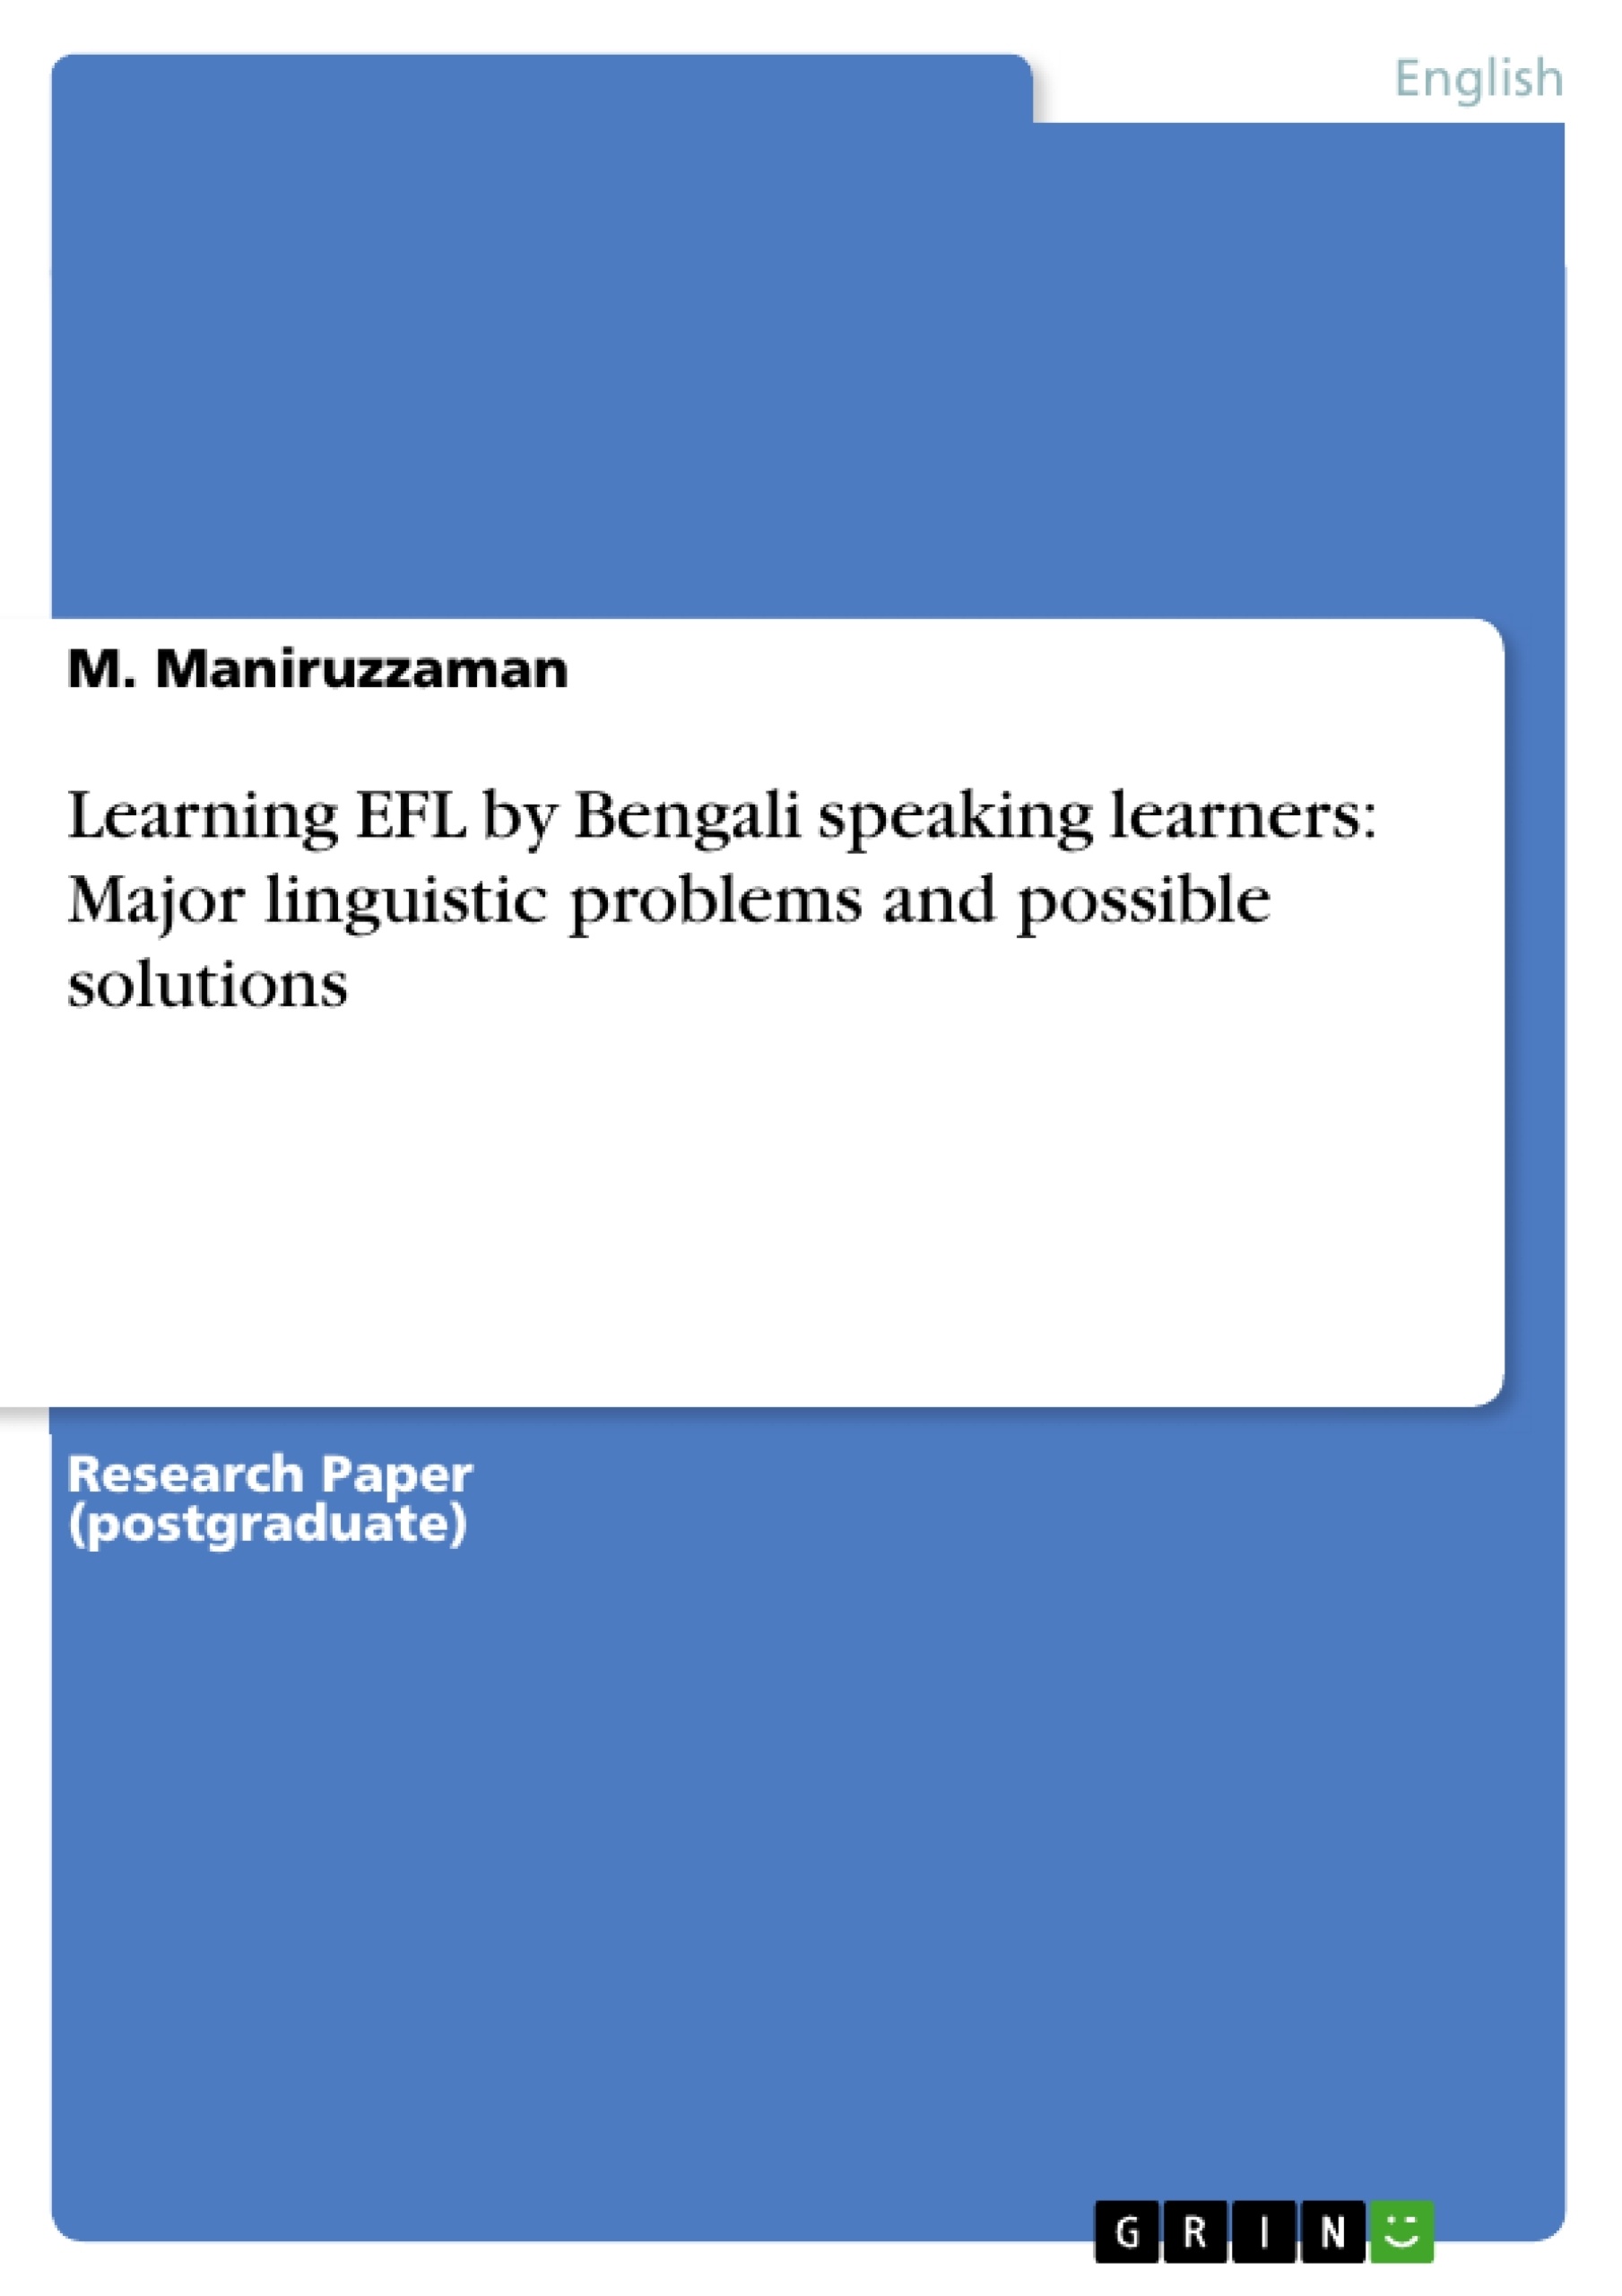 Título: Learning EFL by Bengali speaking learners: Major linguistic problems and possible solutions